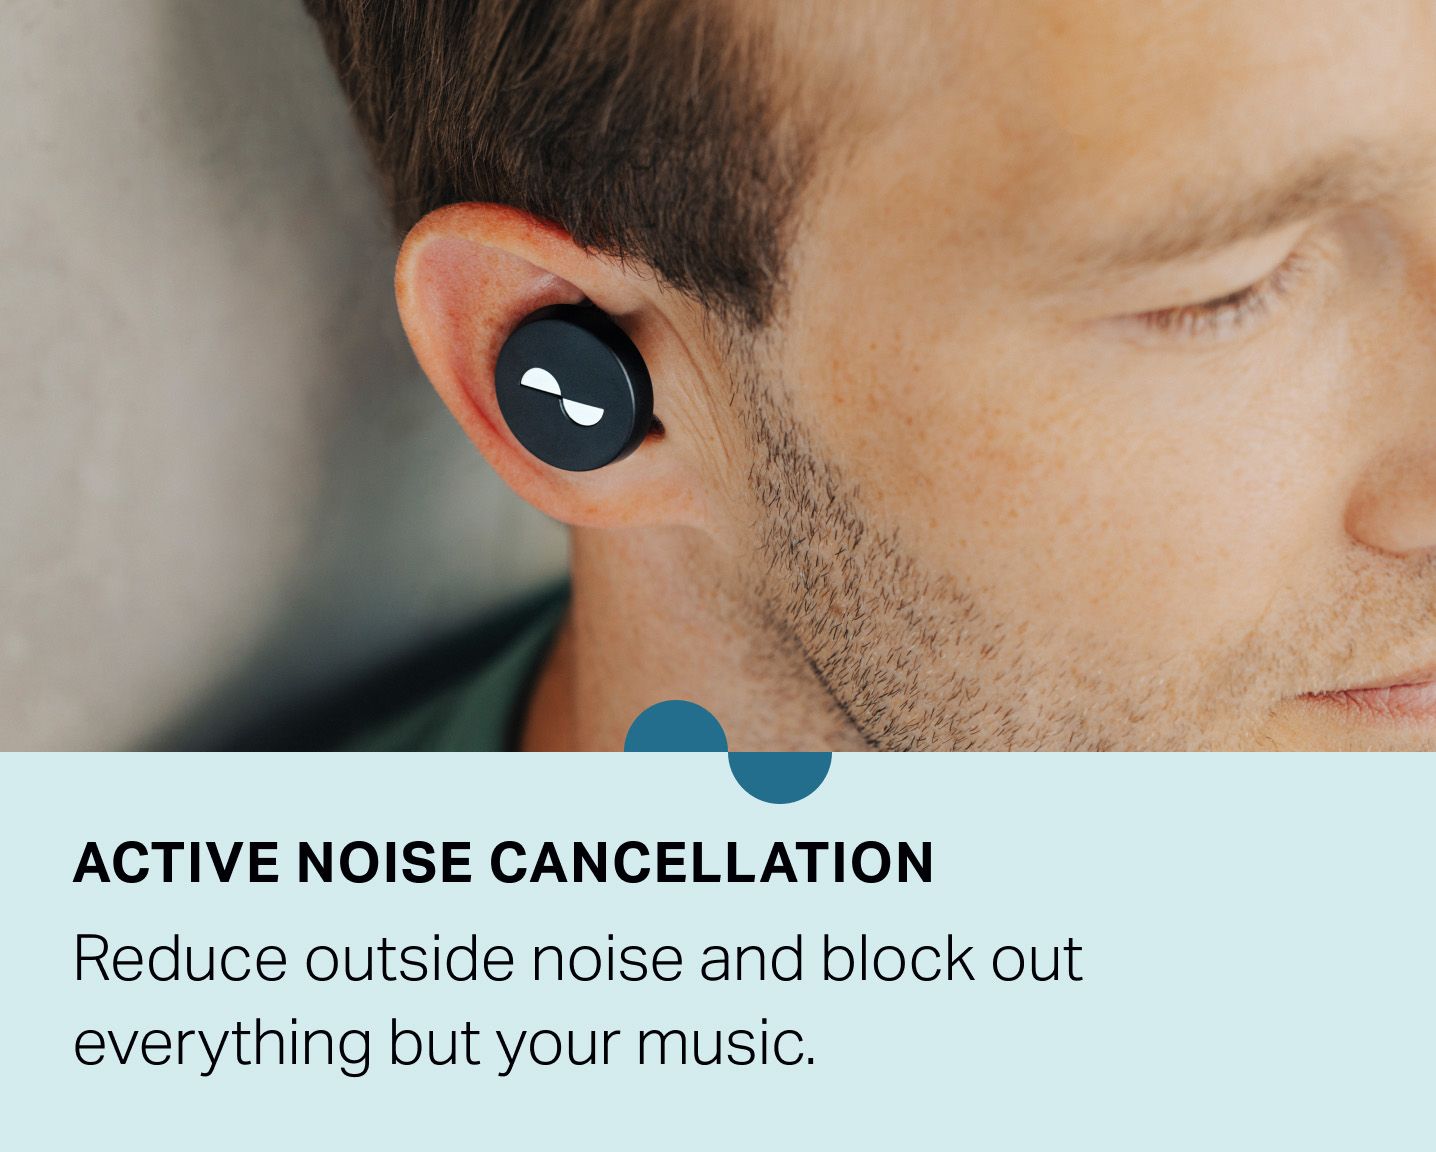 Person with NURATRUE earbuds in ears — "Active Noise Cancellation: Reduce outside noise and block out everything but your music."